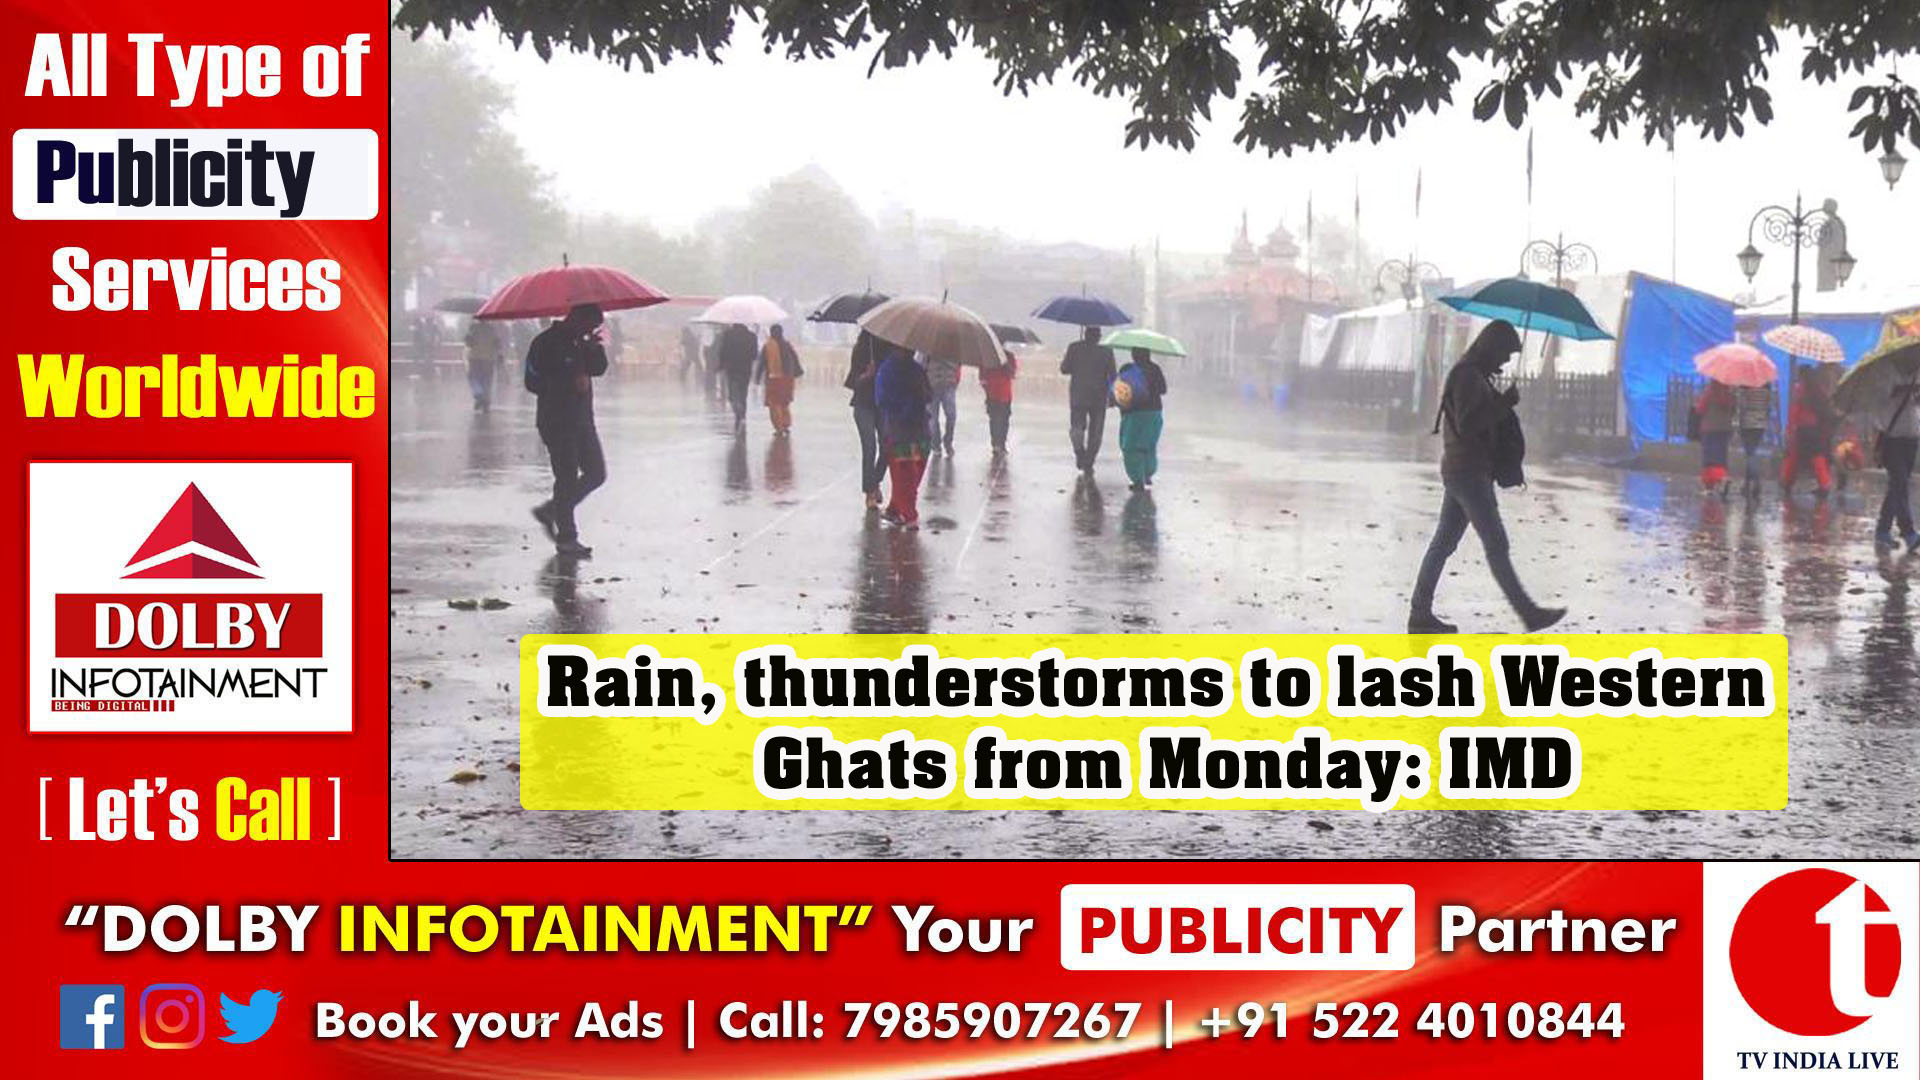 Rain, thunderstorms to lash Western Ghats from Monday: IMD